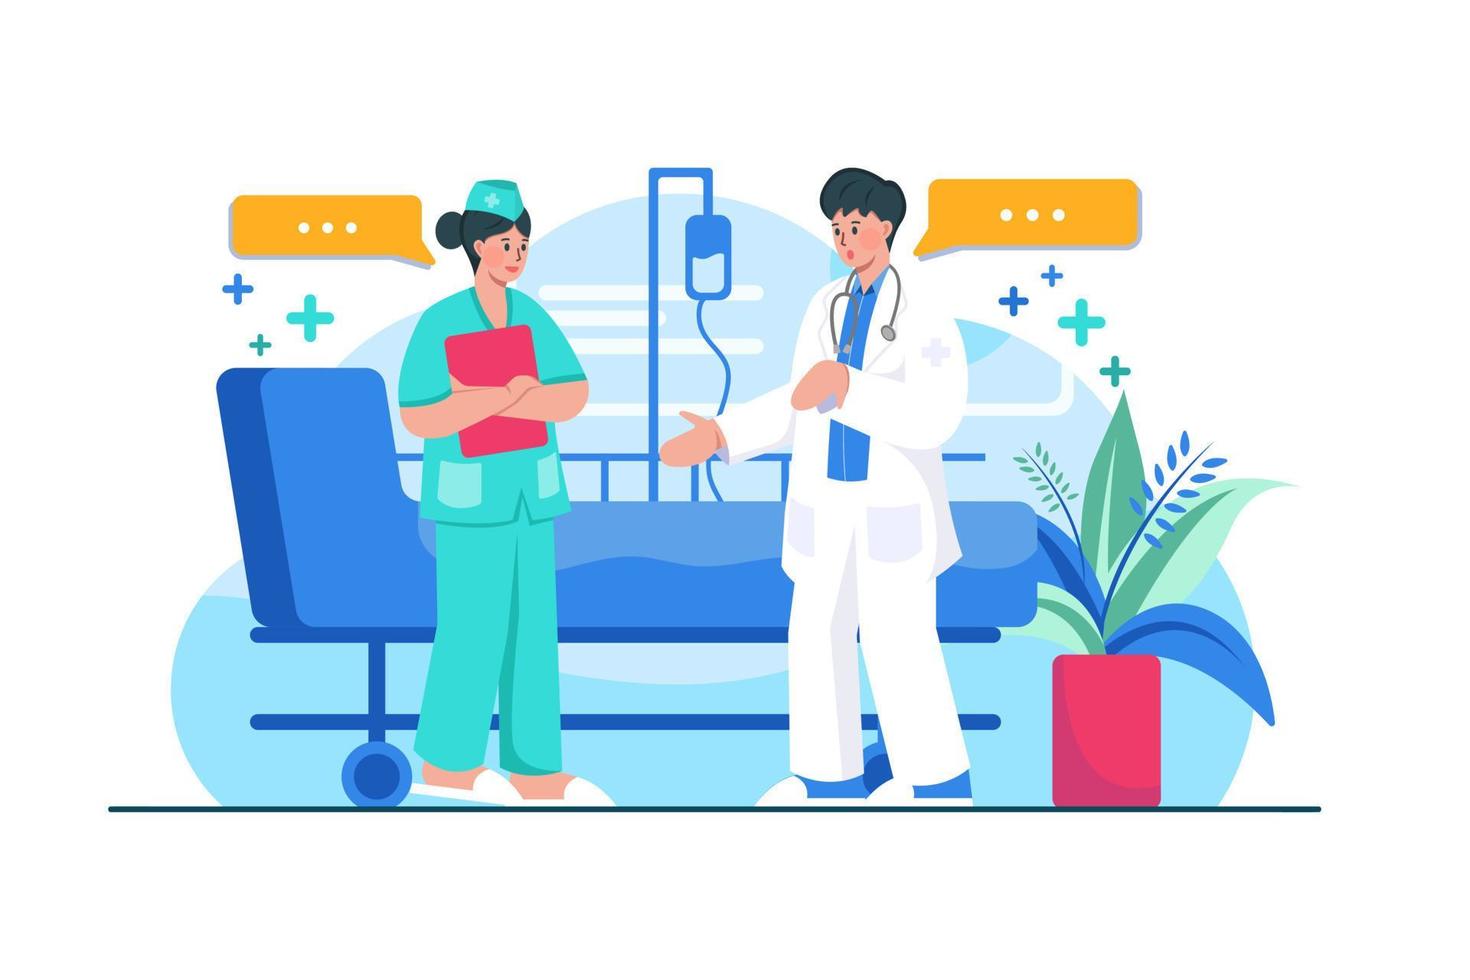 Nurses Discuss With A Doctor Illustration Concept vector